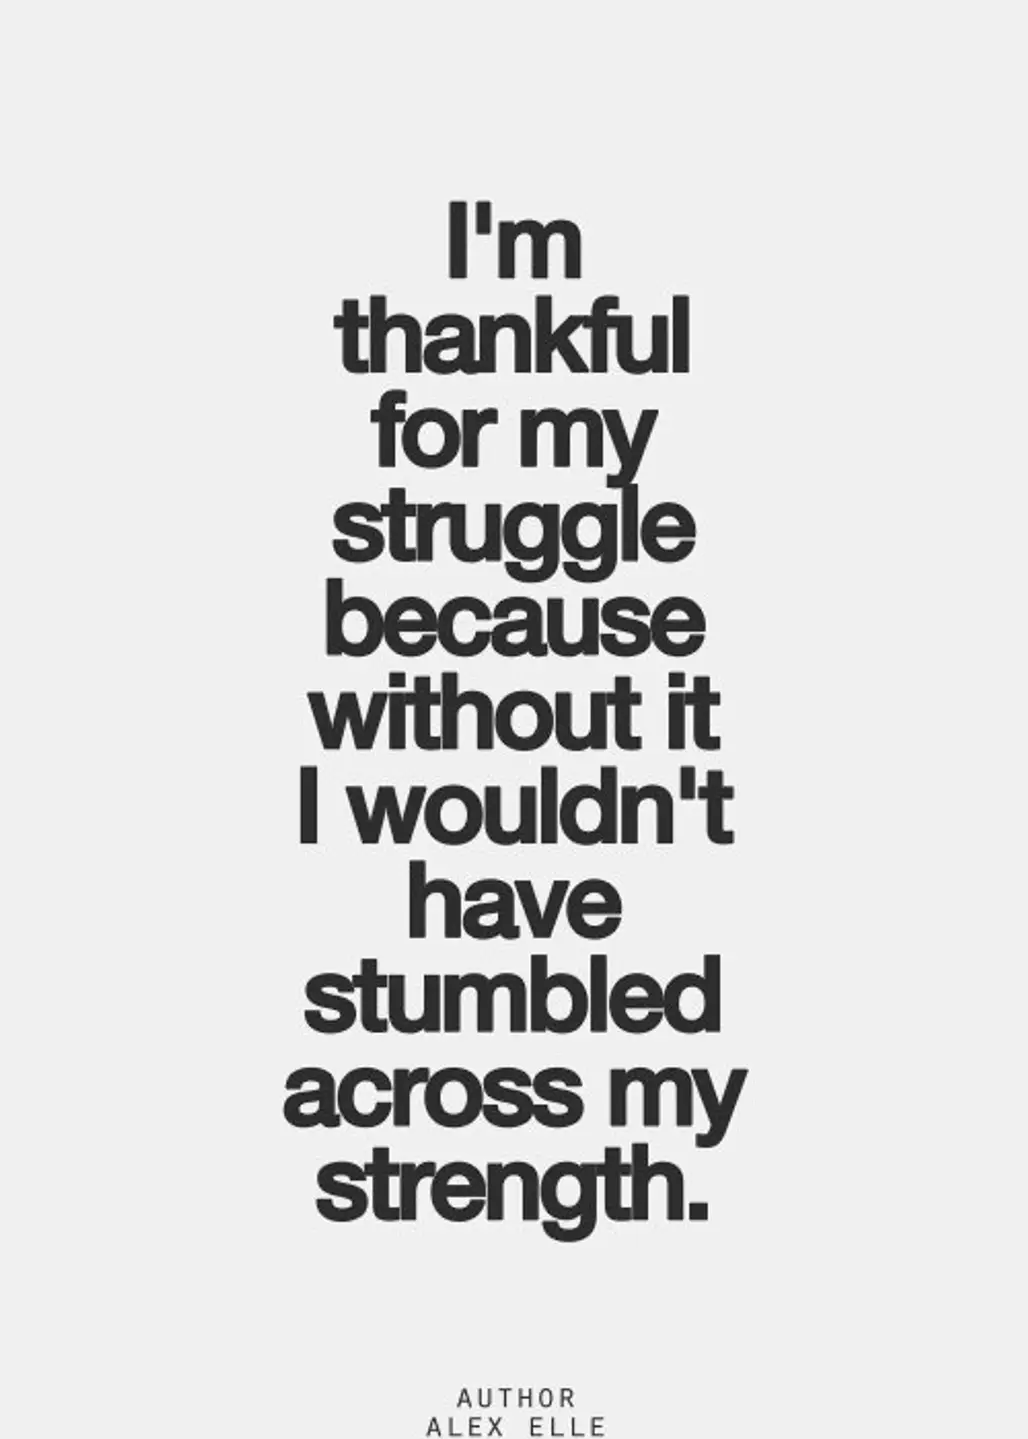 Accept Your Struggles